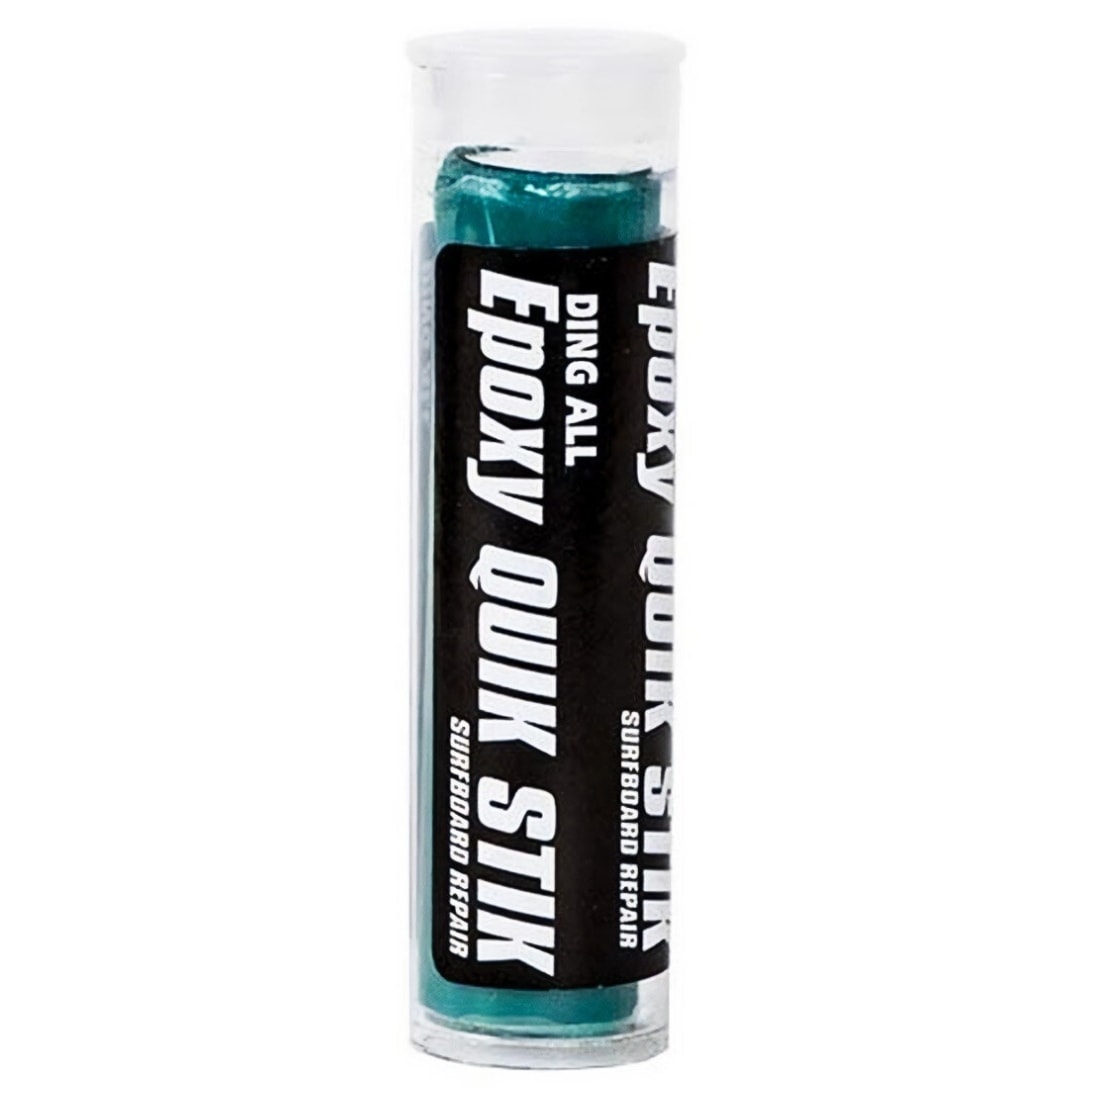 Ding All Epoxy Quik Stick Surfboard Repair Putty - White - Putty Surfboard Repair by Ding All Tube